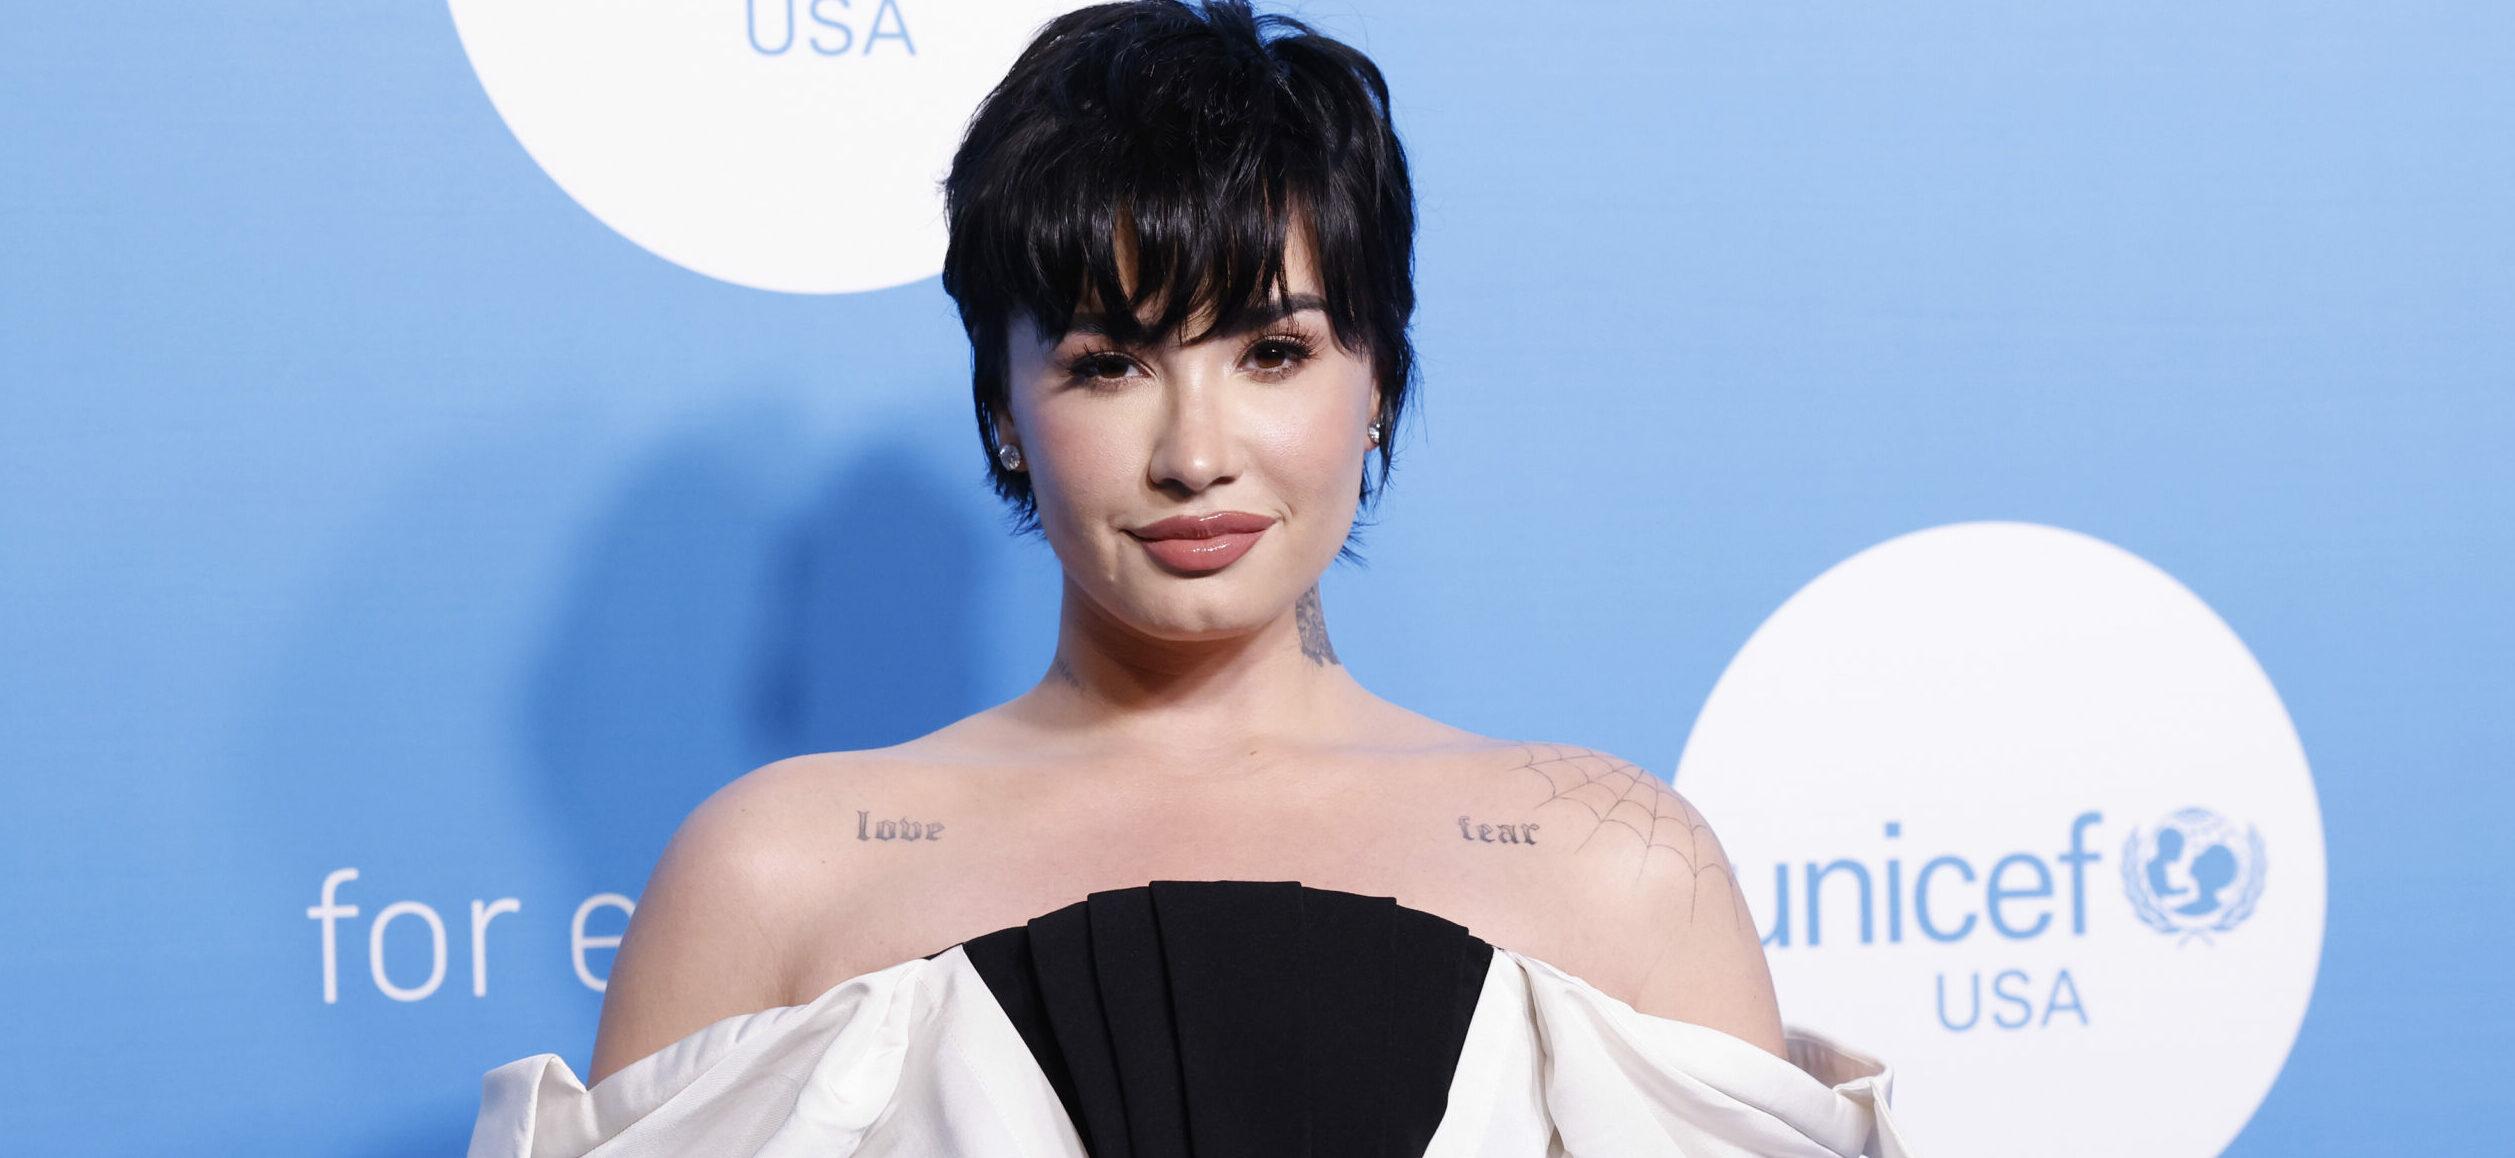 Demi Lovato Releases Pro-Choice Anthem On 1st Anniversary of Roe v Wade Overturning